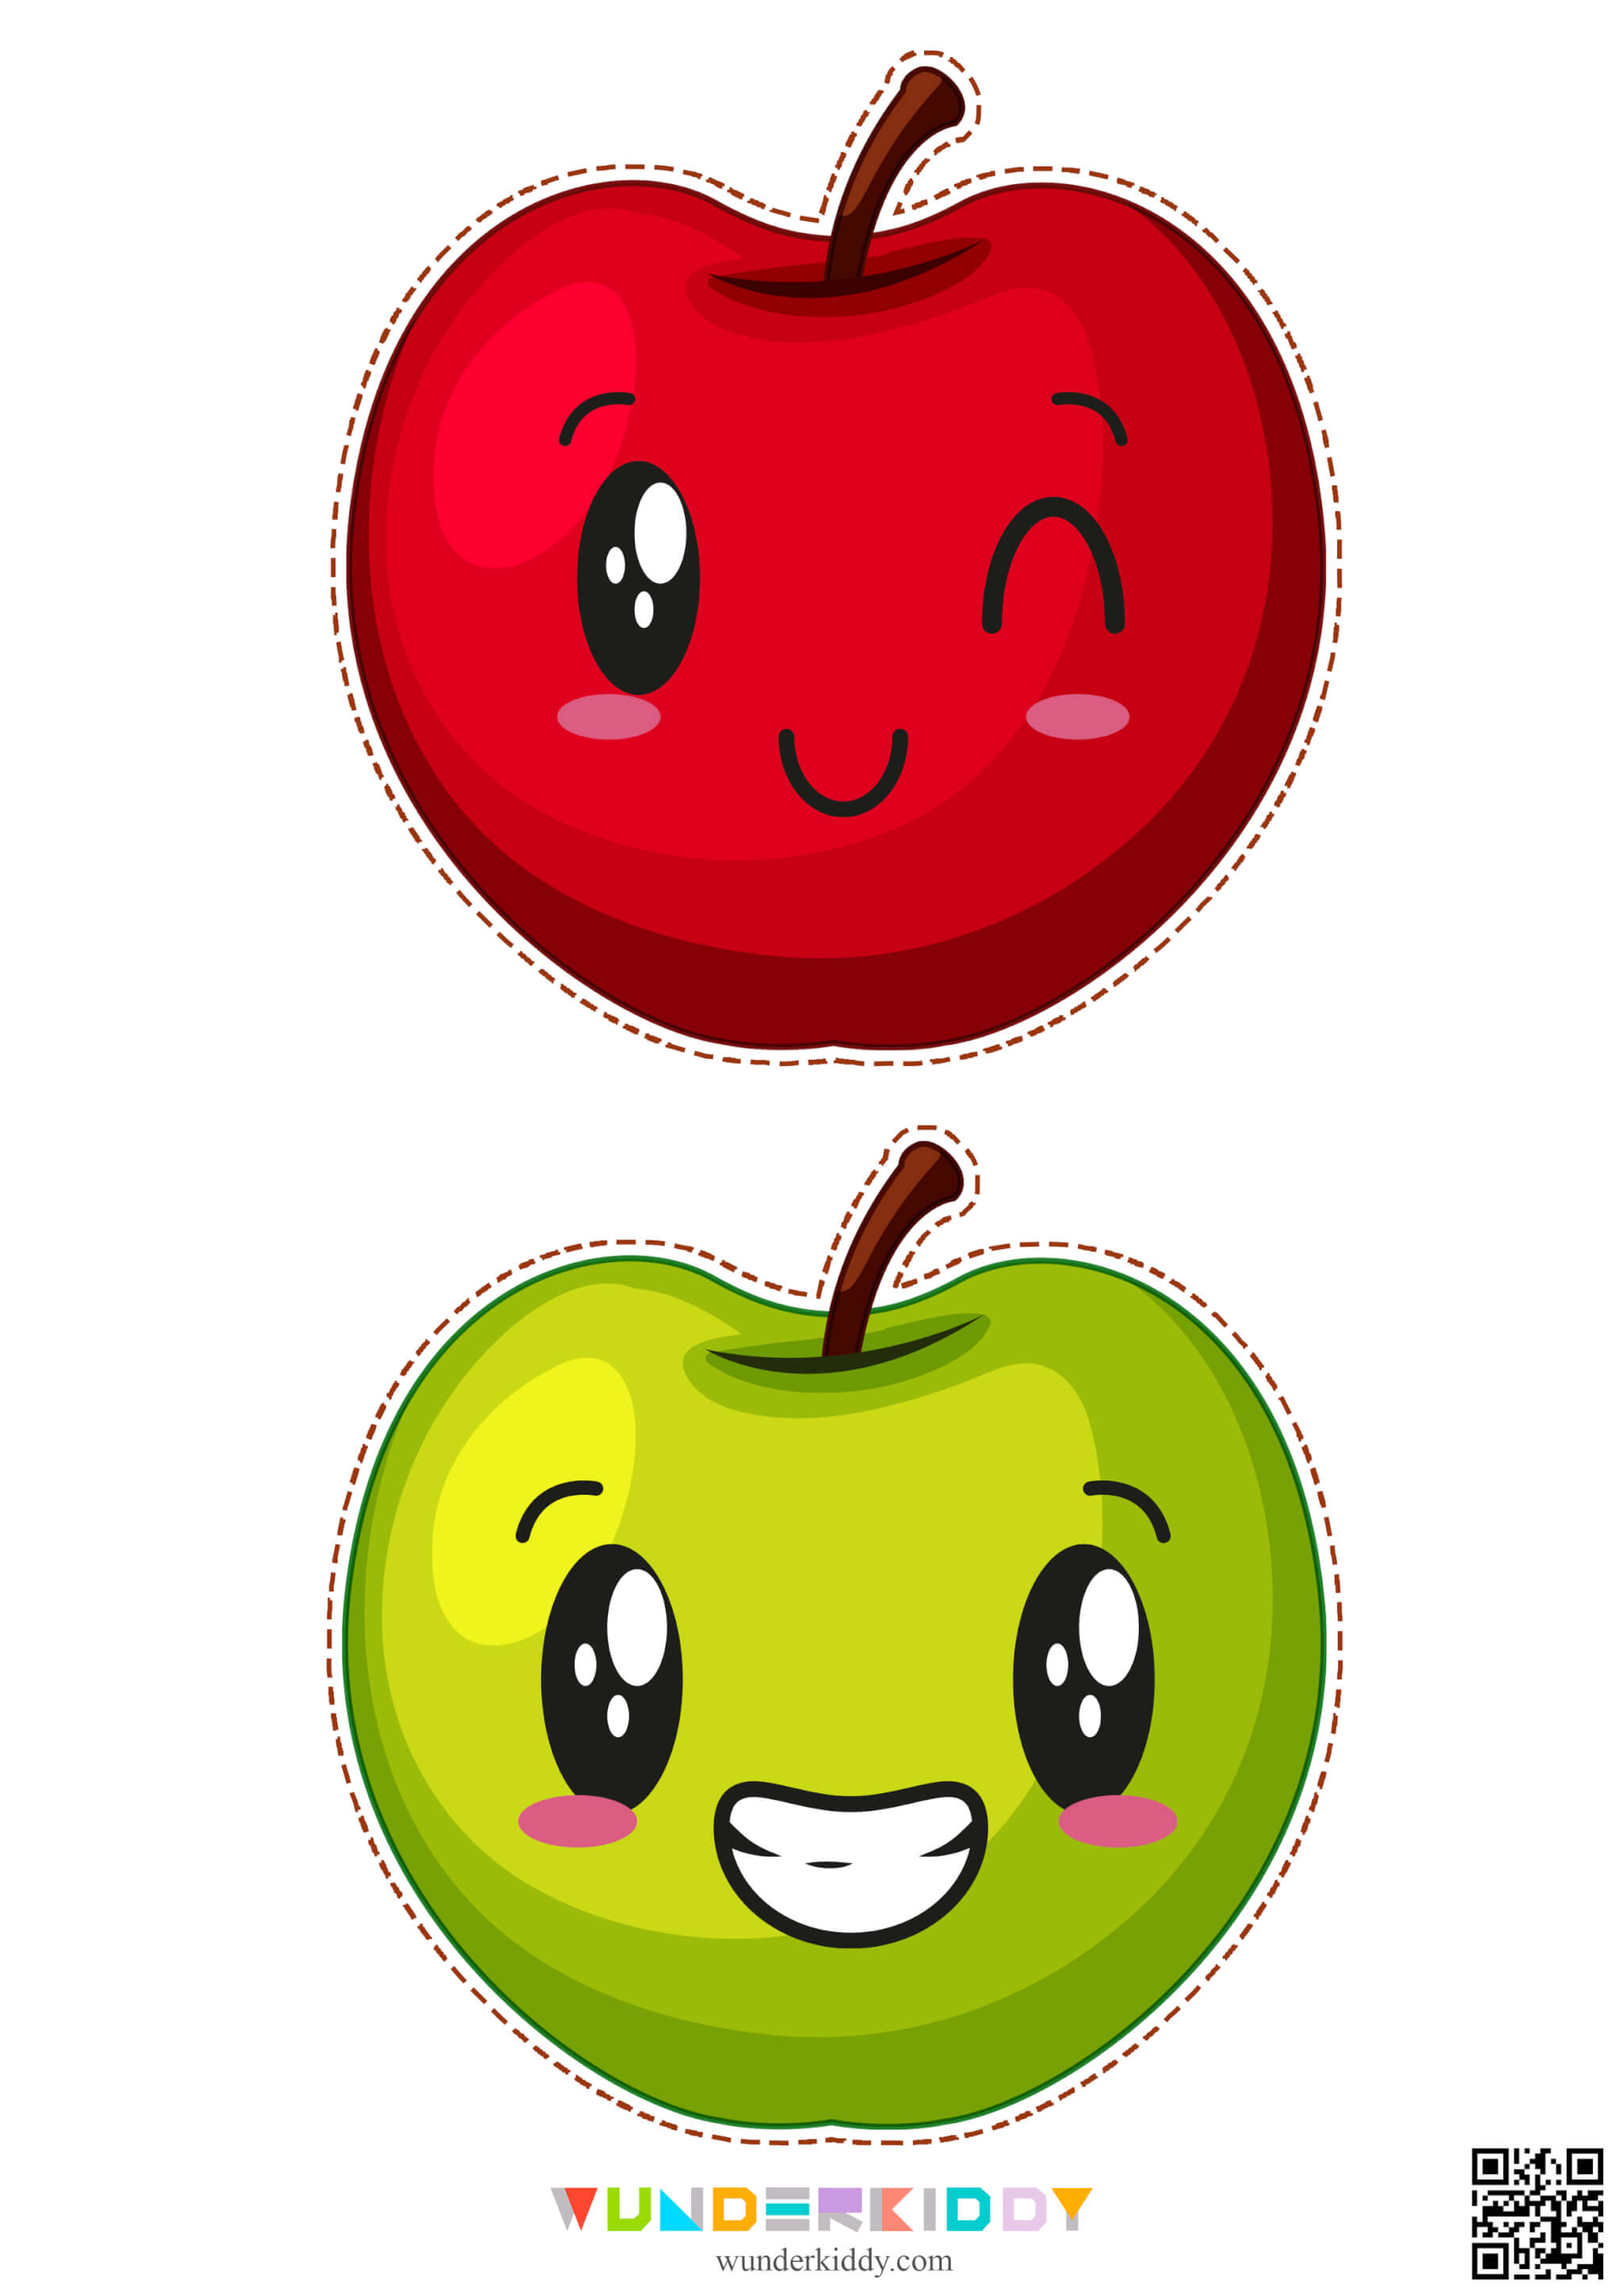 Template «Apples» - Image 2